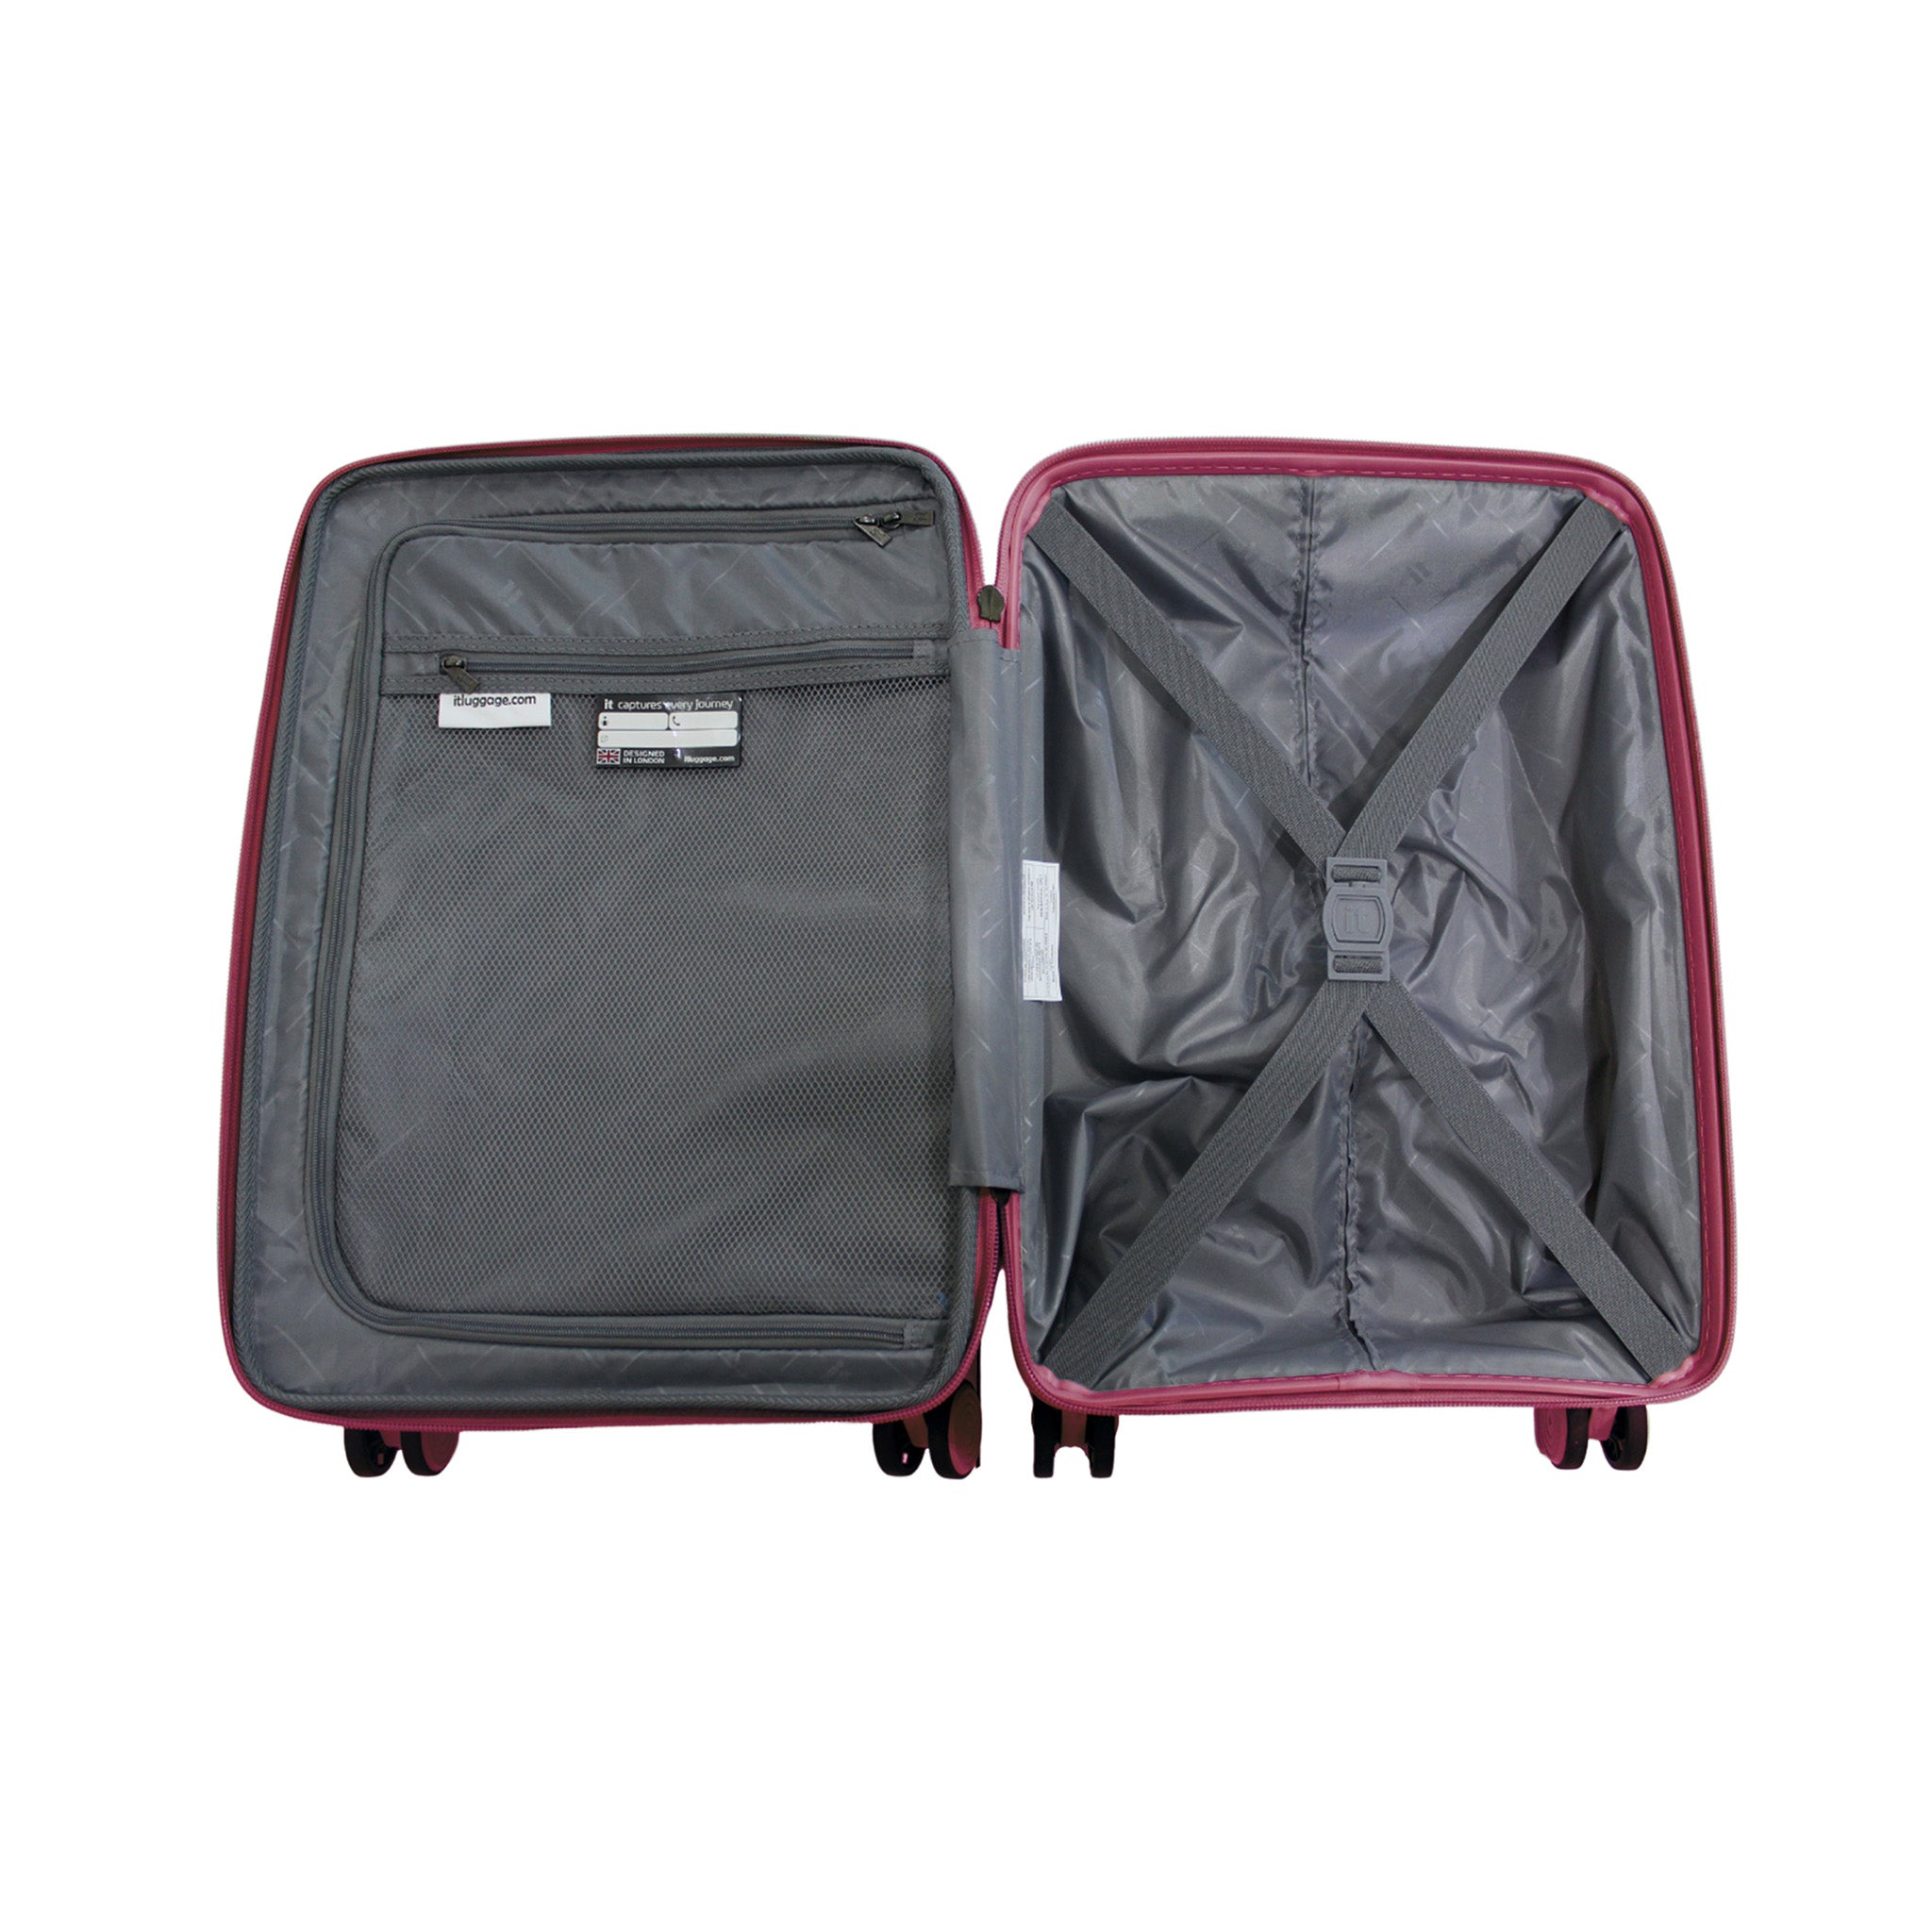 it Luggage  Suitcases, Cabin Bags & Luggage designed in UK